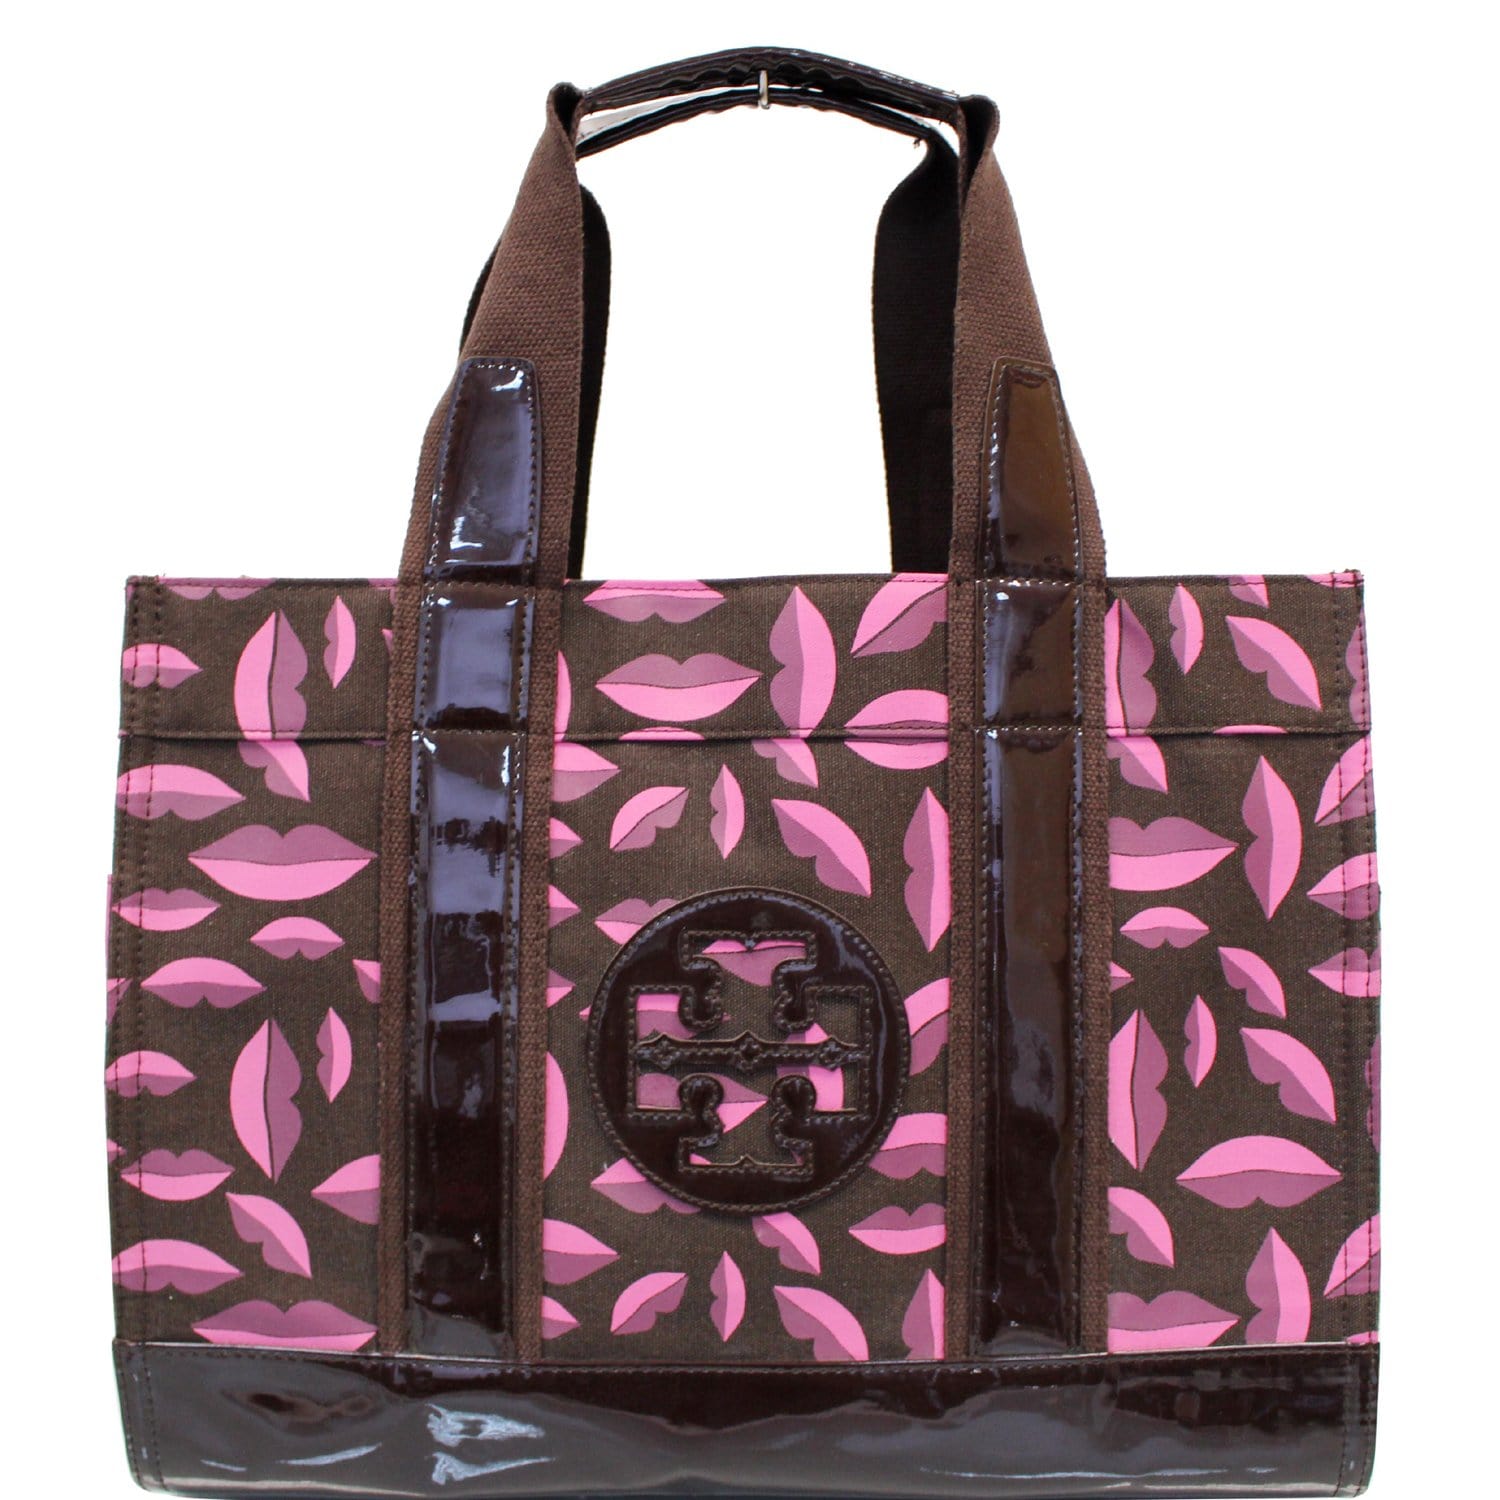 Shop Tory Burch Leather Elegant Style Totes by Lollipopkids